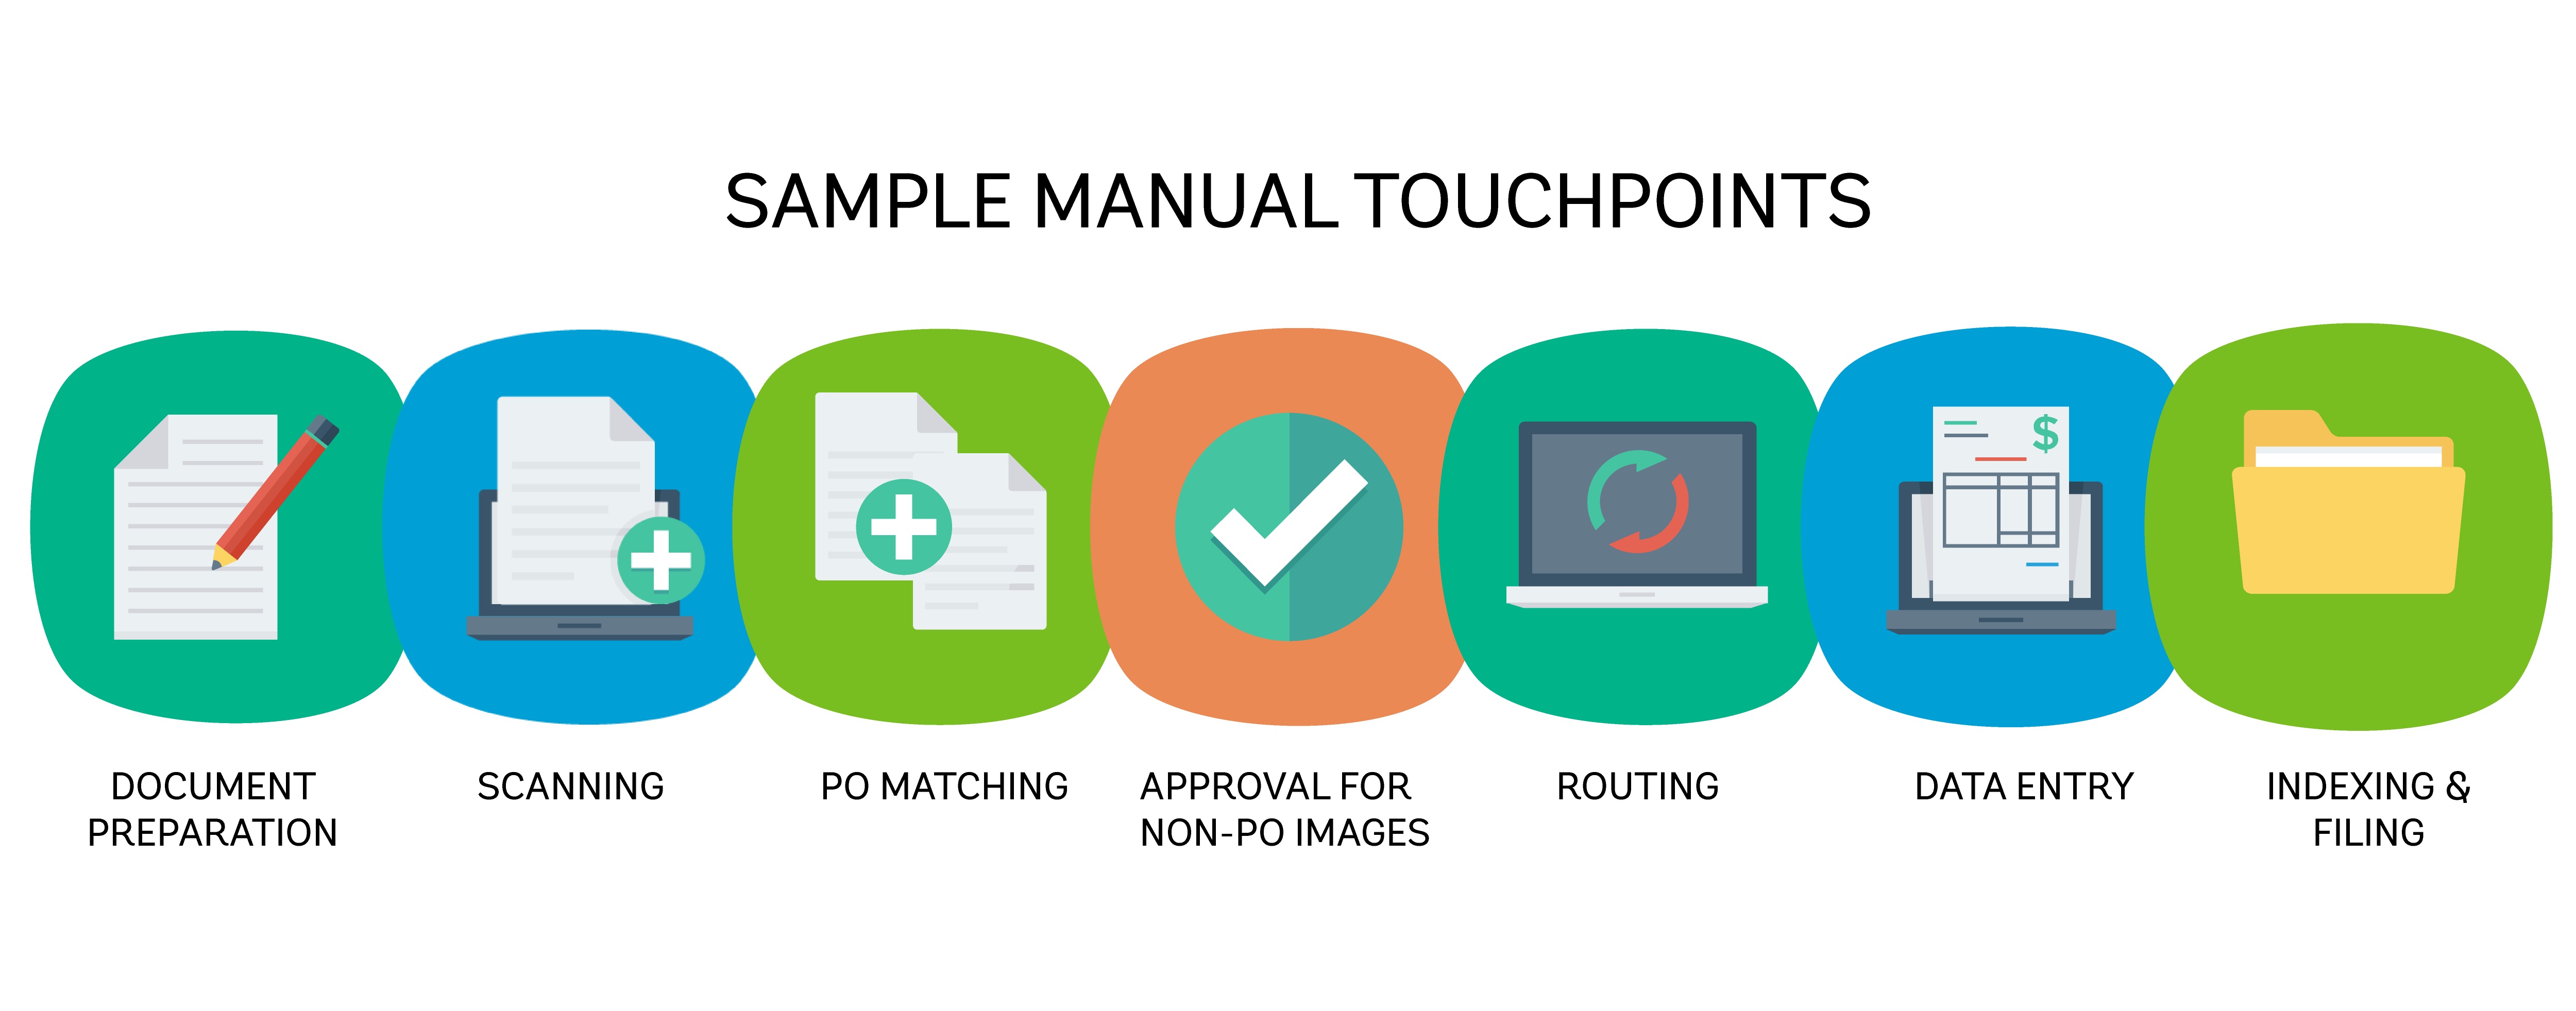 Manual Touchpoints Across AP Automation